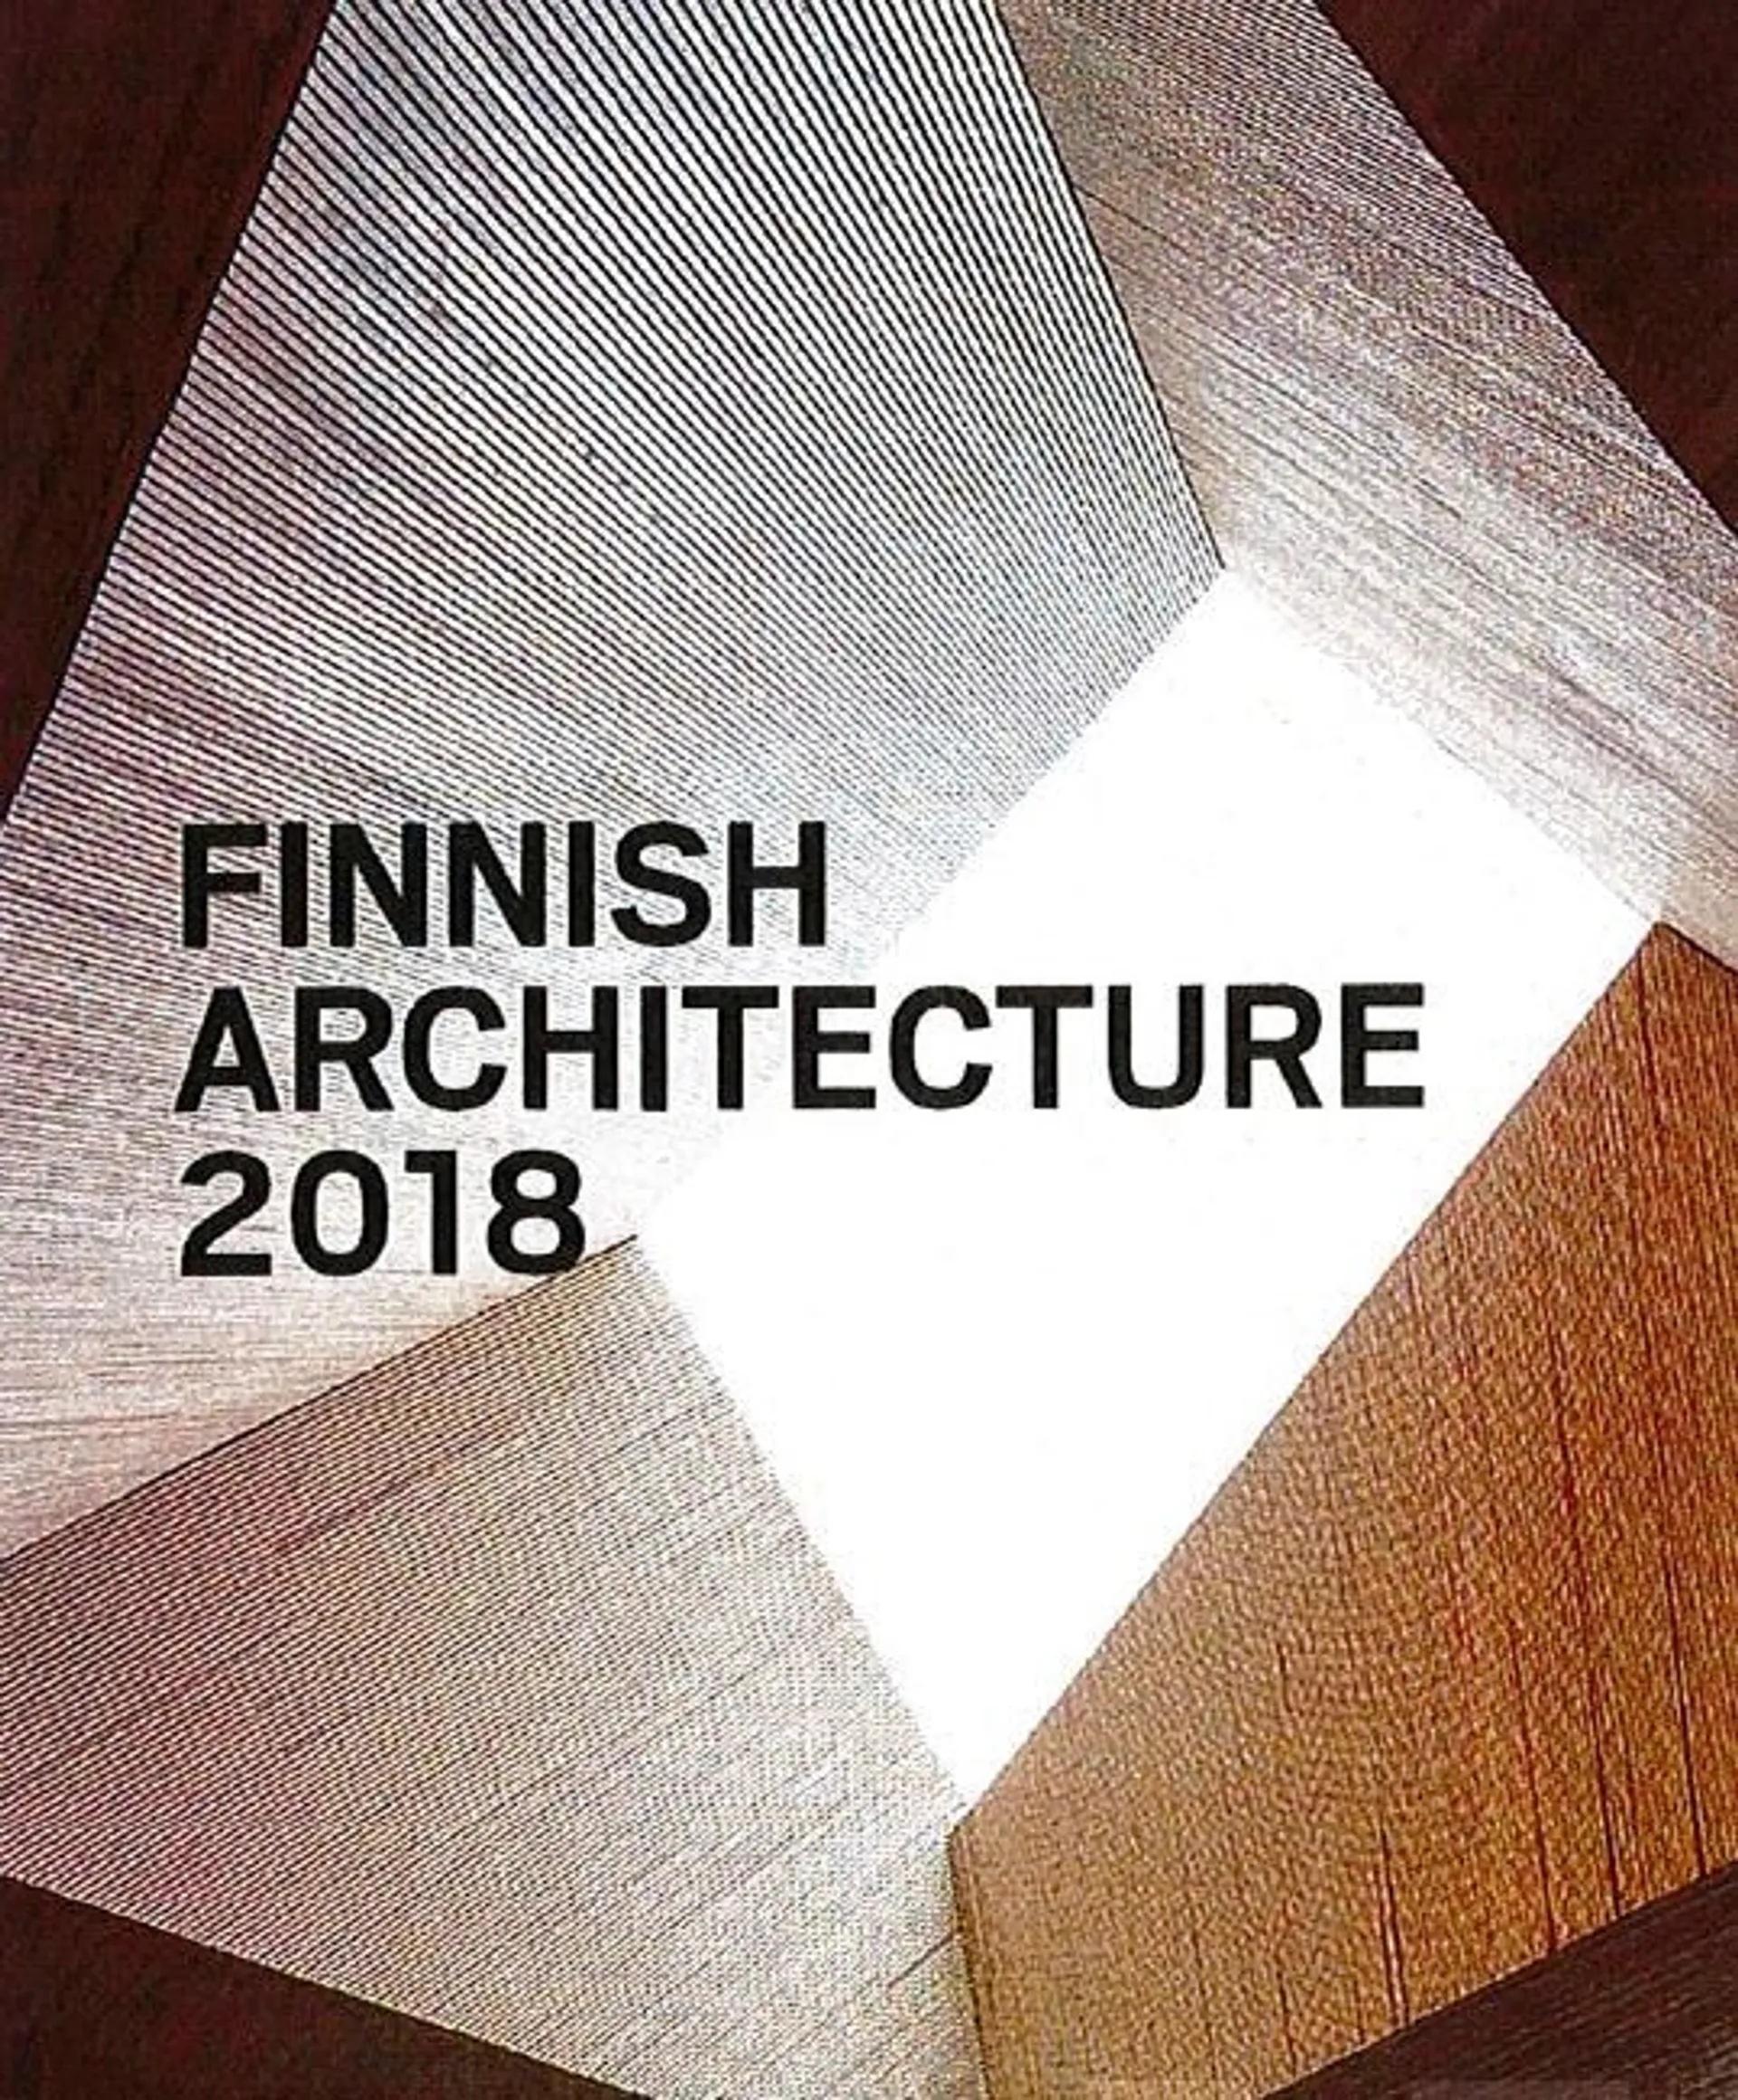 Finnish Architecture Review 2018